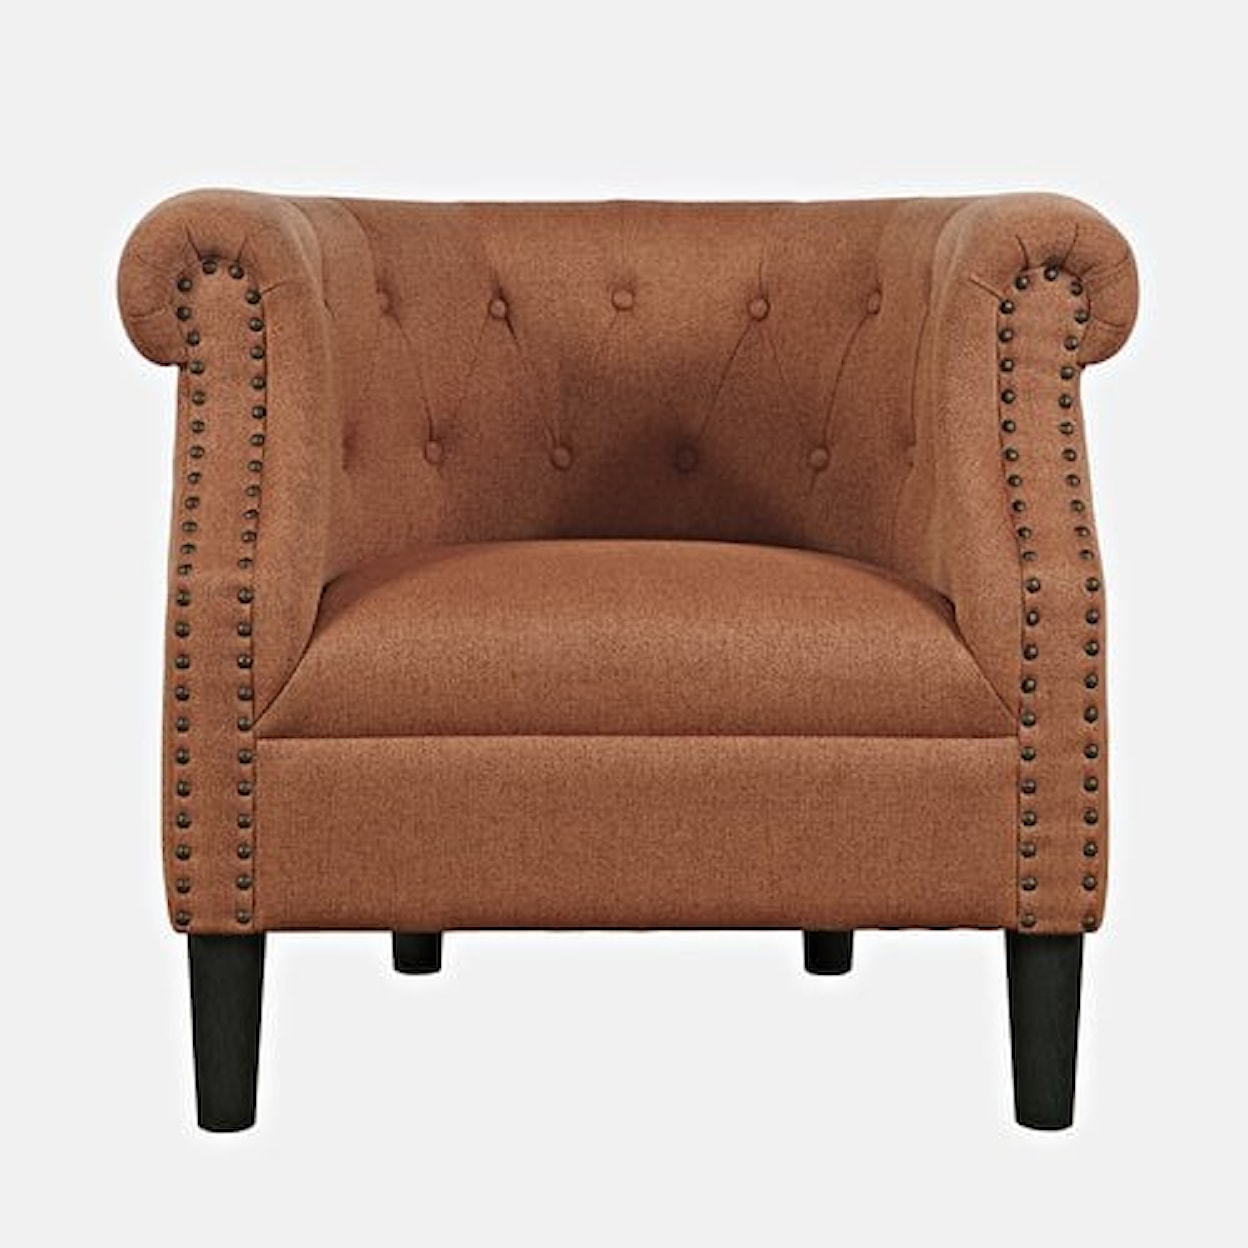 VFM Signature Lily Accent Chair - Spice